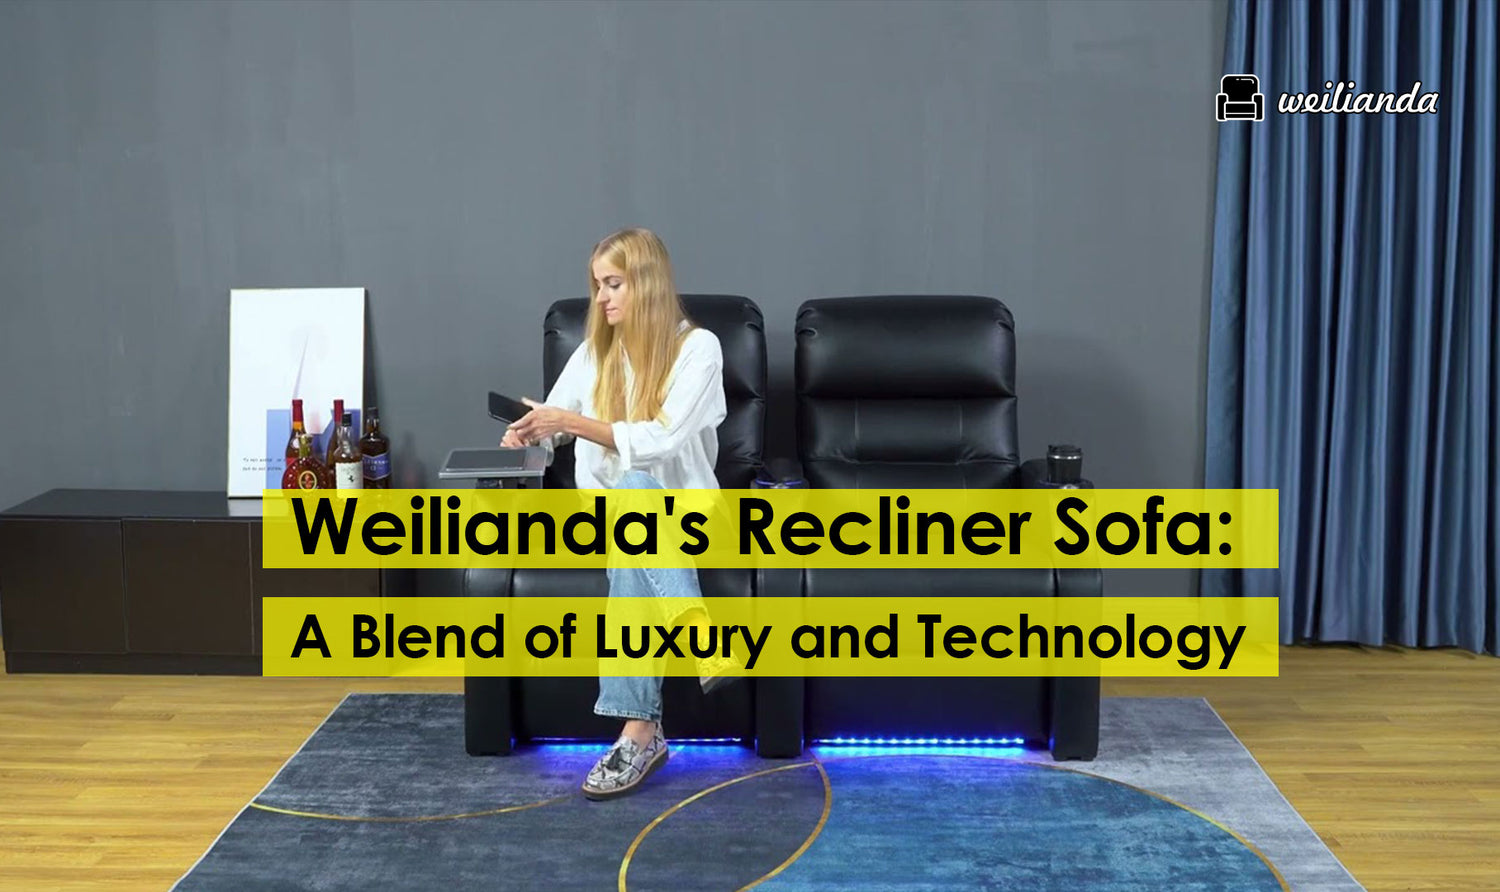 Weilianda's Recliner Sofa: A Blend of Luxury and Technology